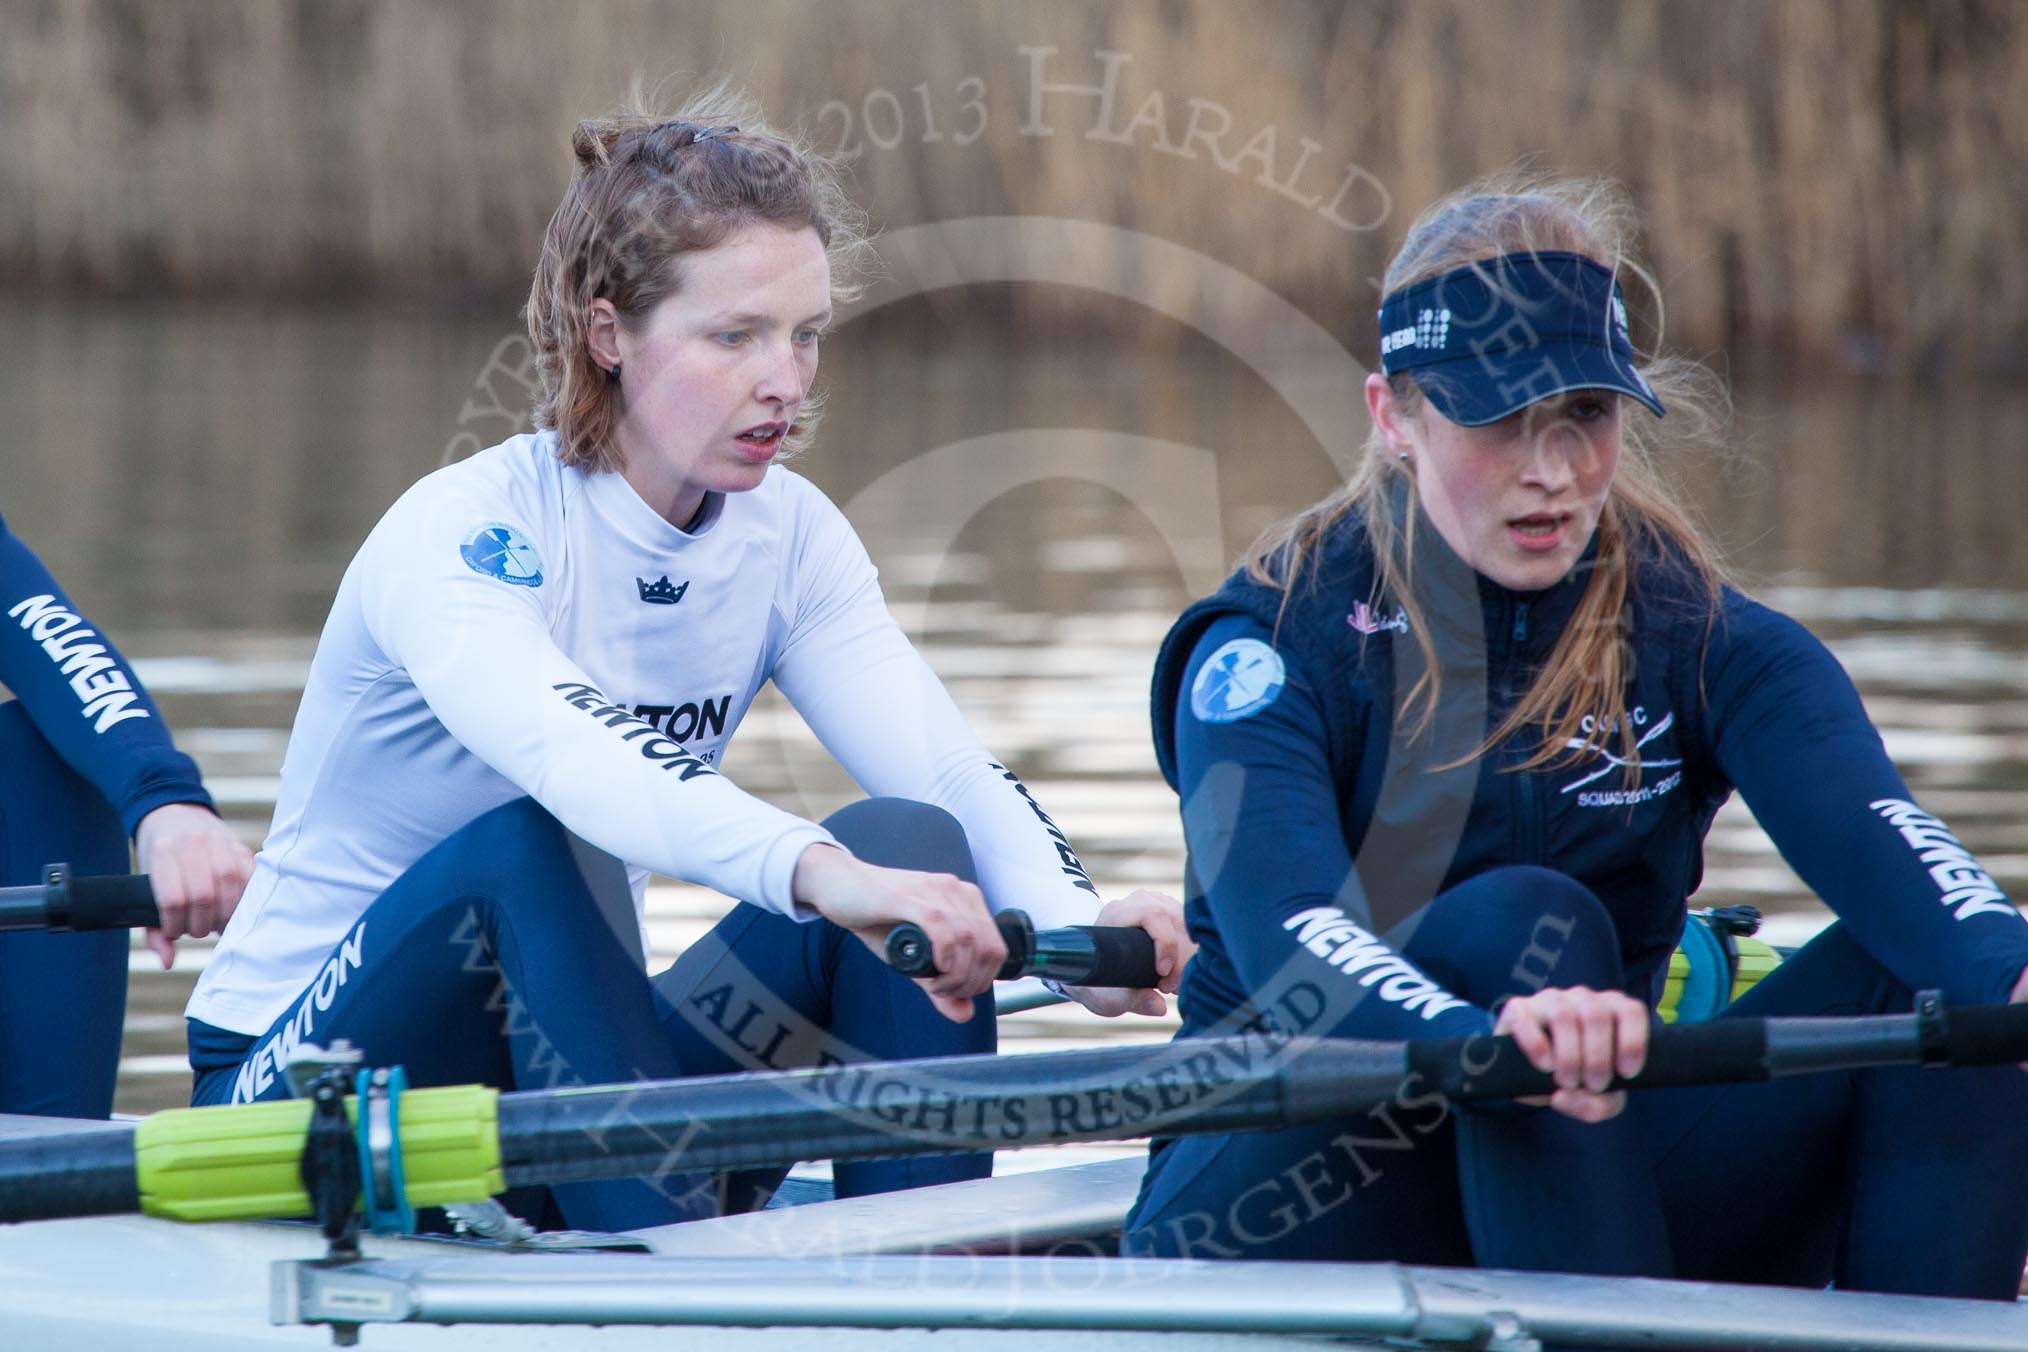 The Boat Race season 2013 - OUWBC training: OUWBC Blue Boat 2 seat Alice Carrington-Windo and 3 seat Mary Foord-Weston..
River Thames,
Wallingford,
Oxfordshire,
United Kingdom,
on 13 March 2013 at 17:14, image #112